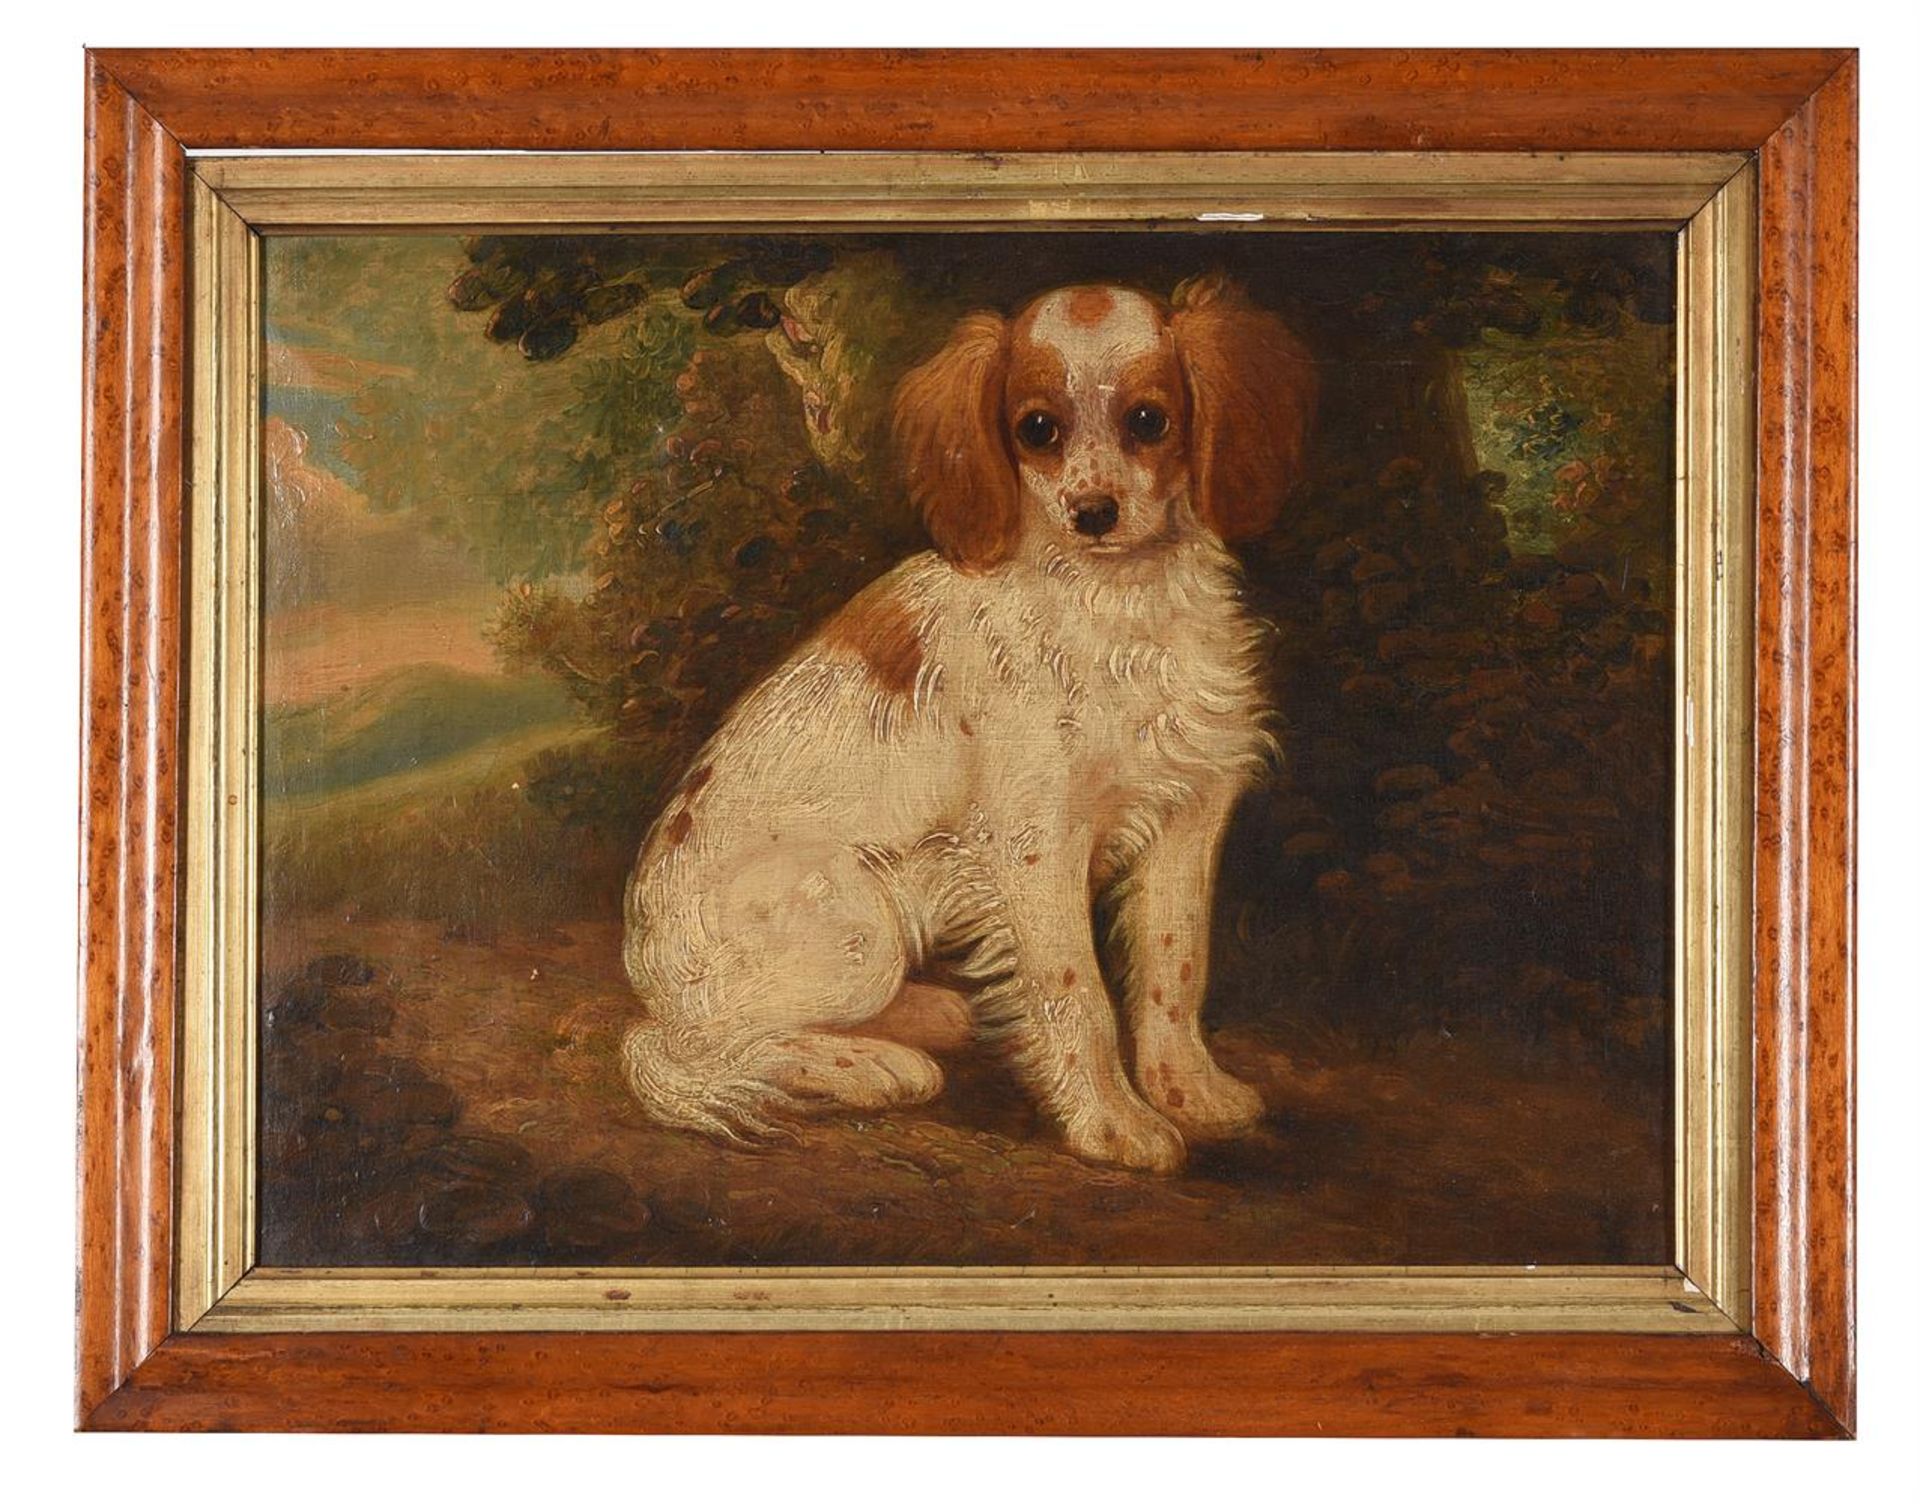 FOLLOWER OF HENRY BERNARD CHALON, SPANIEL, SEATED IN A WOODED LANDSCAPE - Image 2 of 3